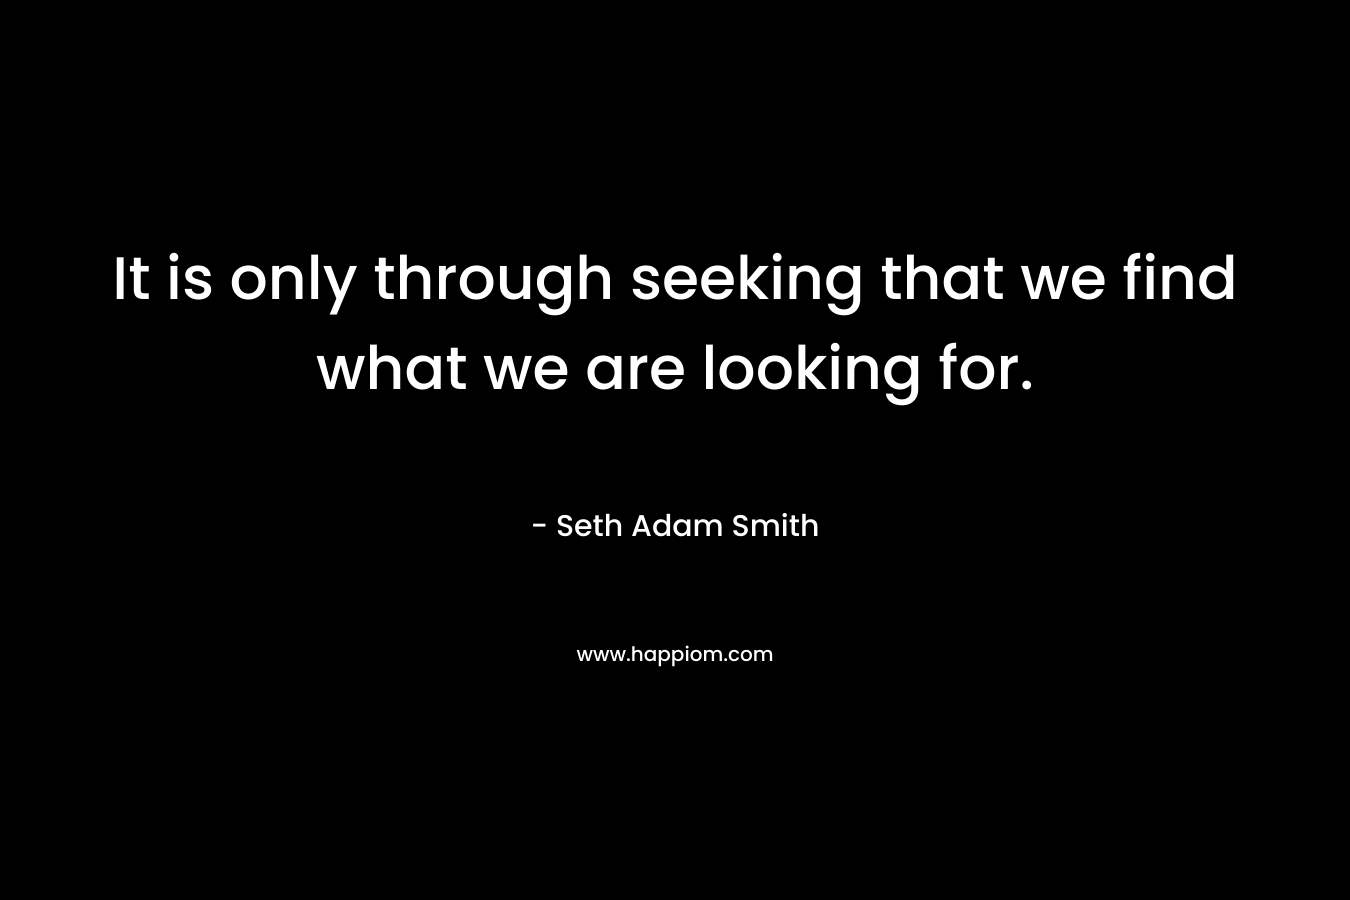 It is only through seeking that we find what we are looking for. – Seth Adam Smith